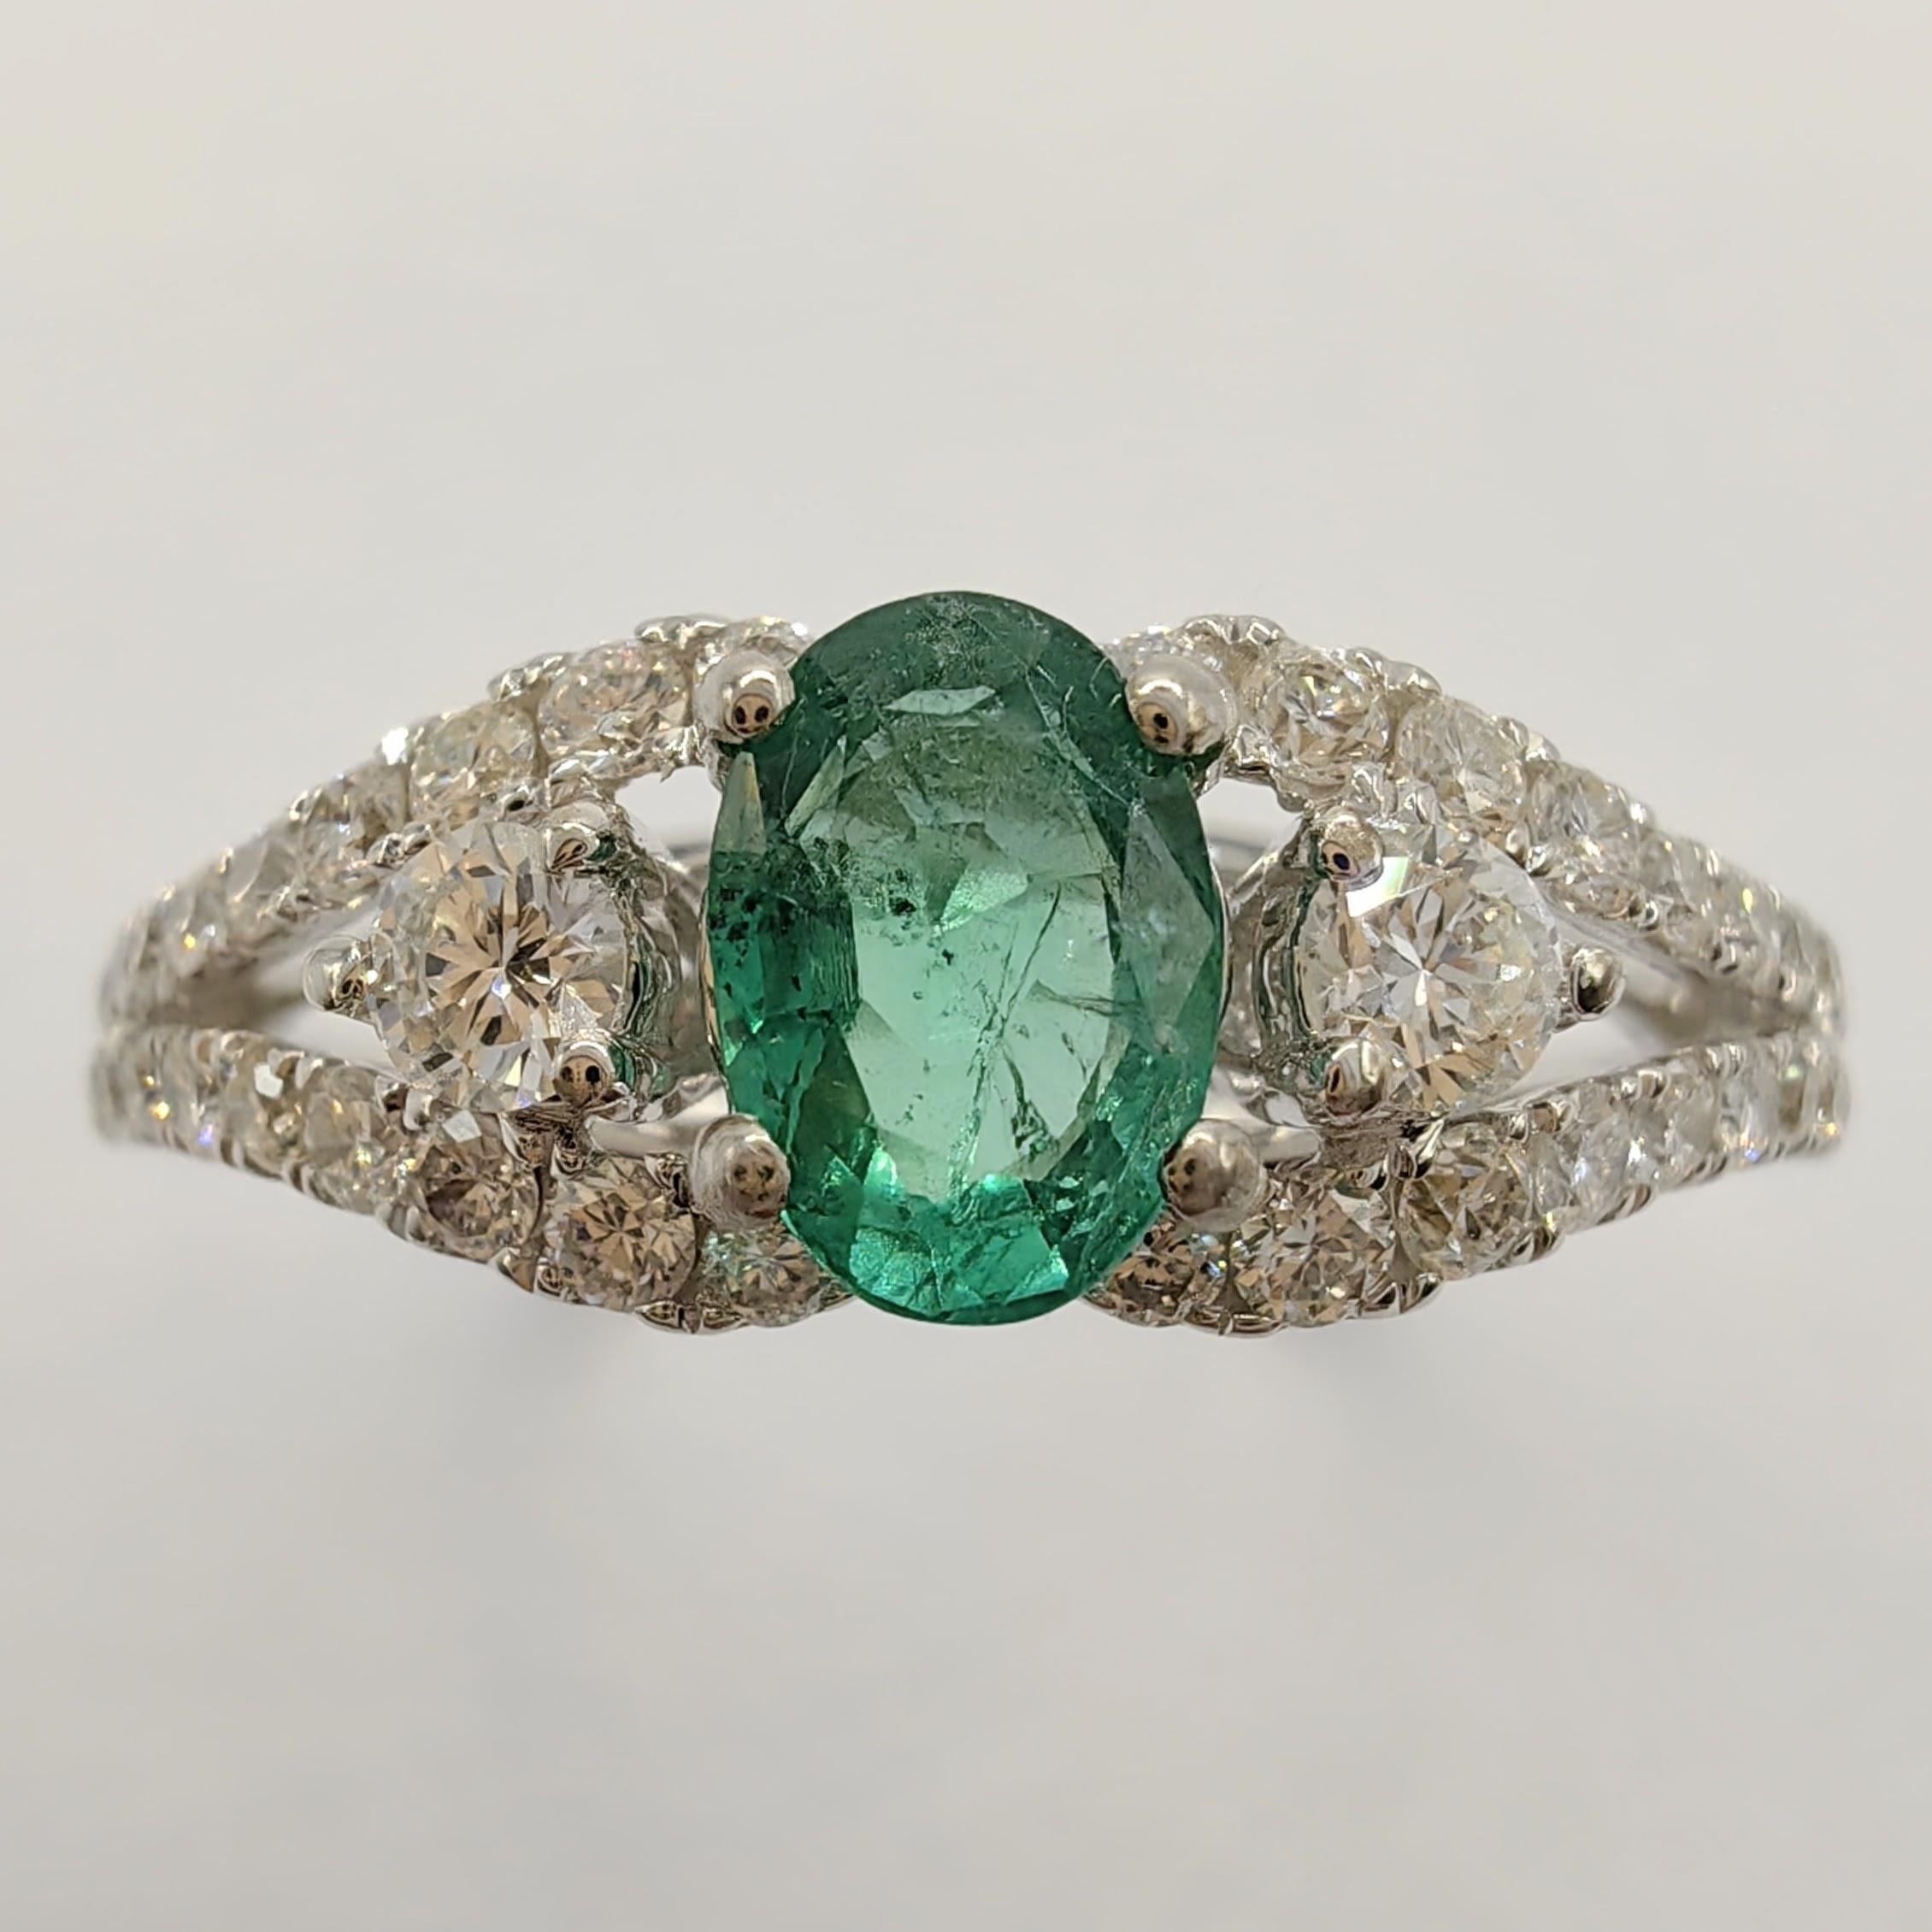 Contemporary Oval-Cut Vivid Green Emerald Diamond Cluster Ring in 18k White Gold For Sale